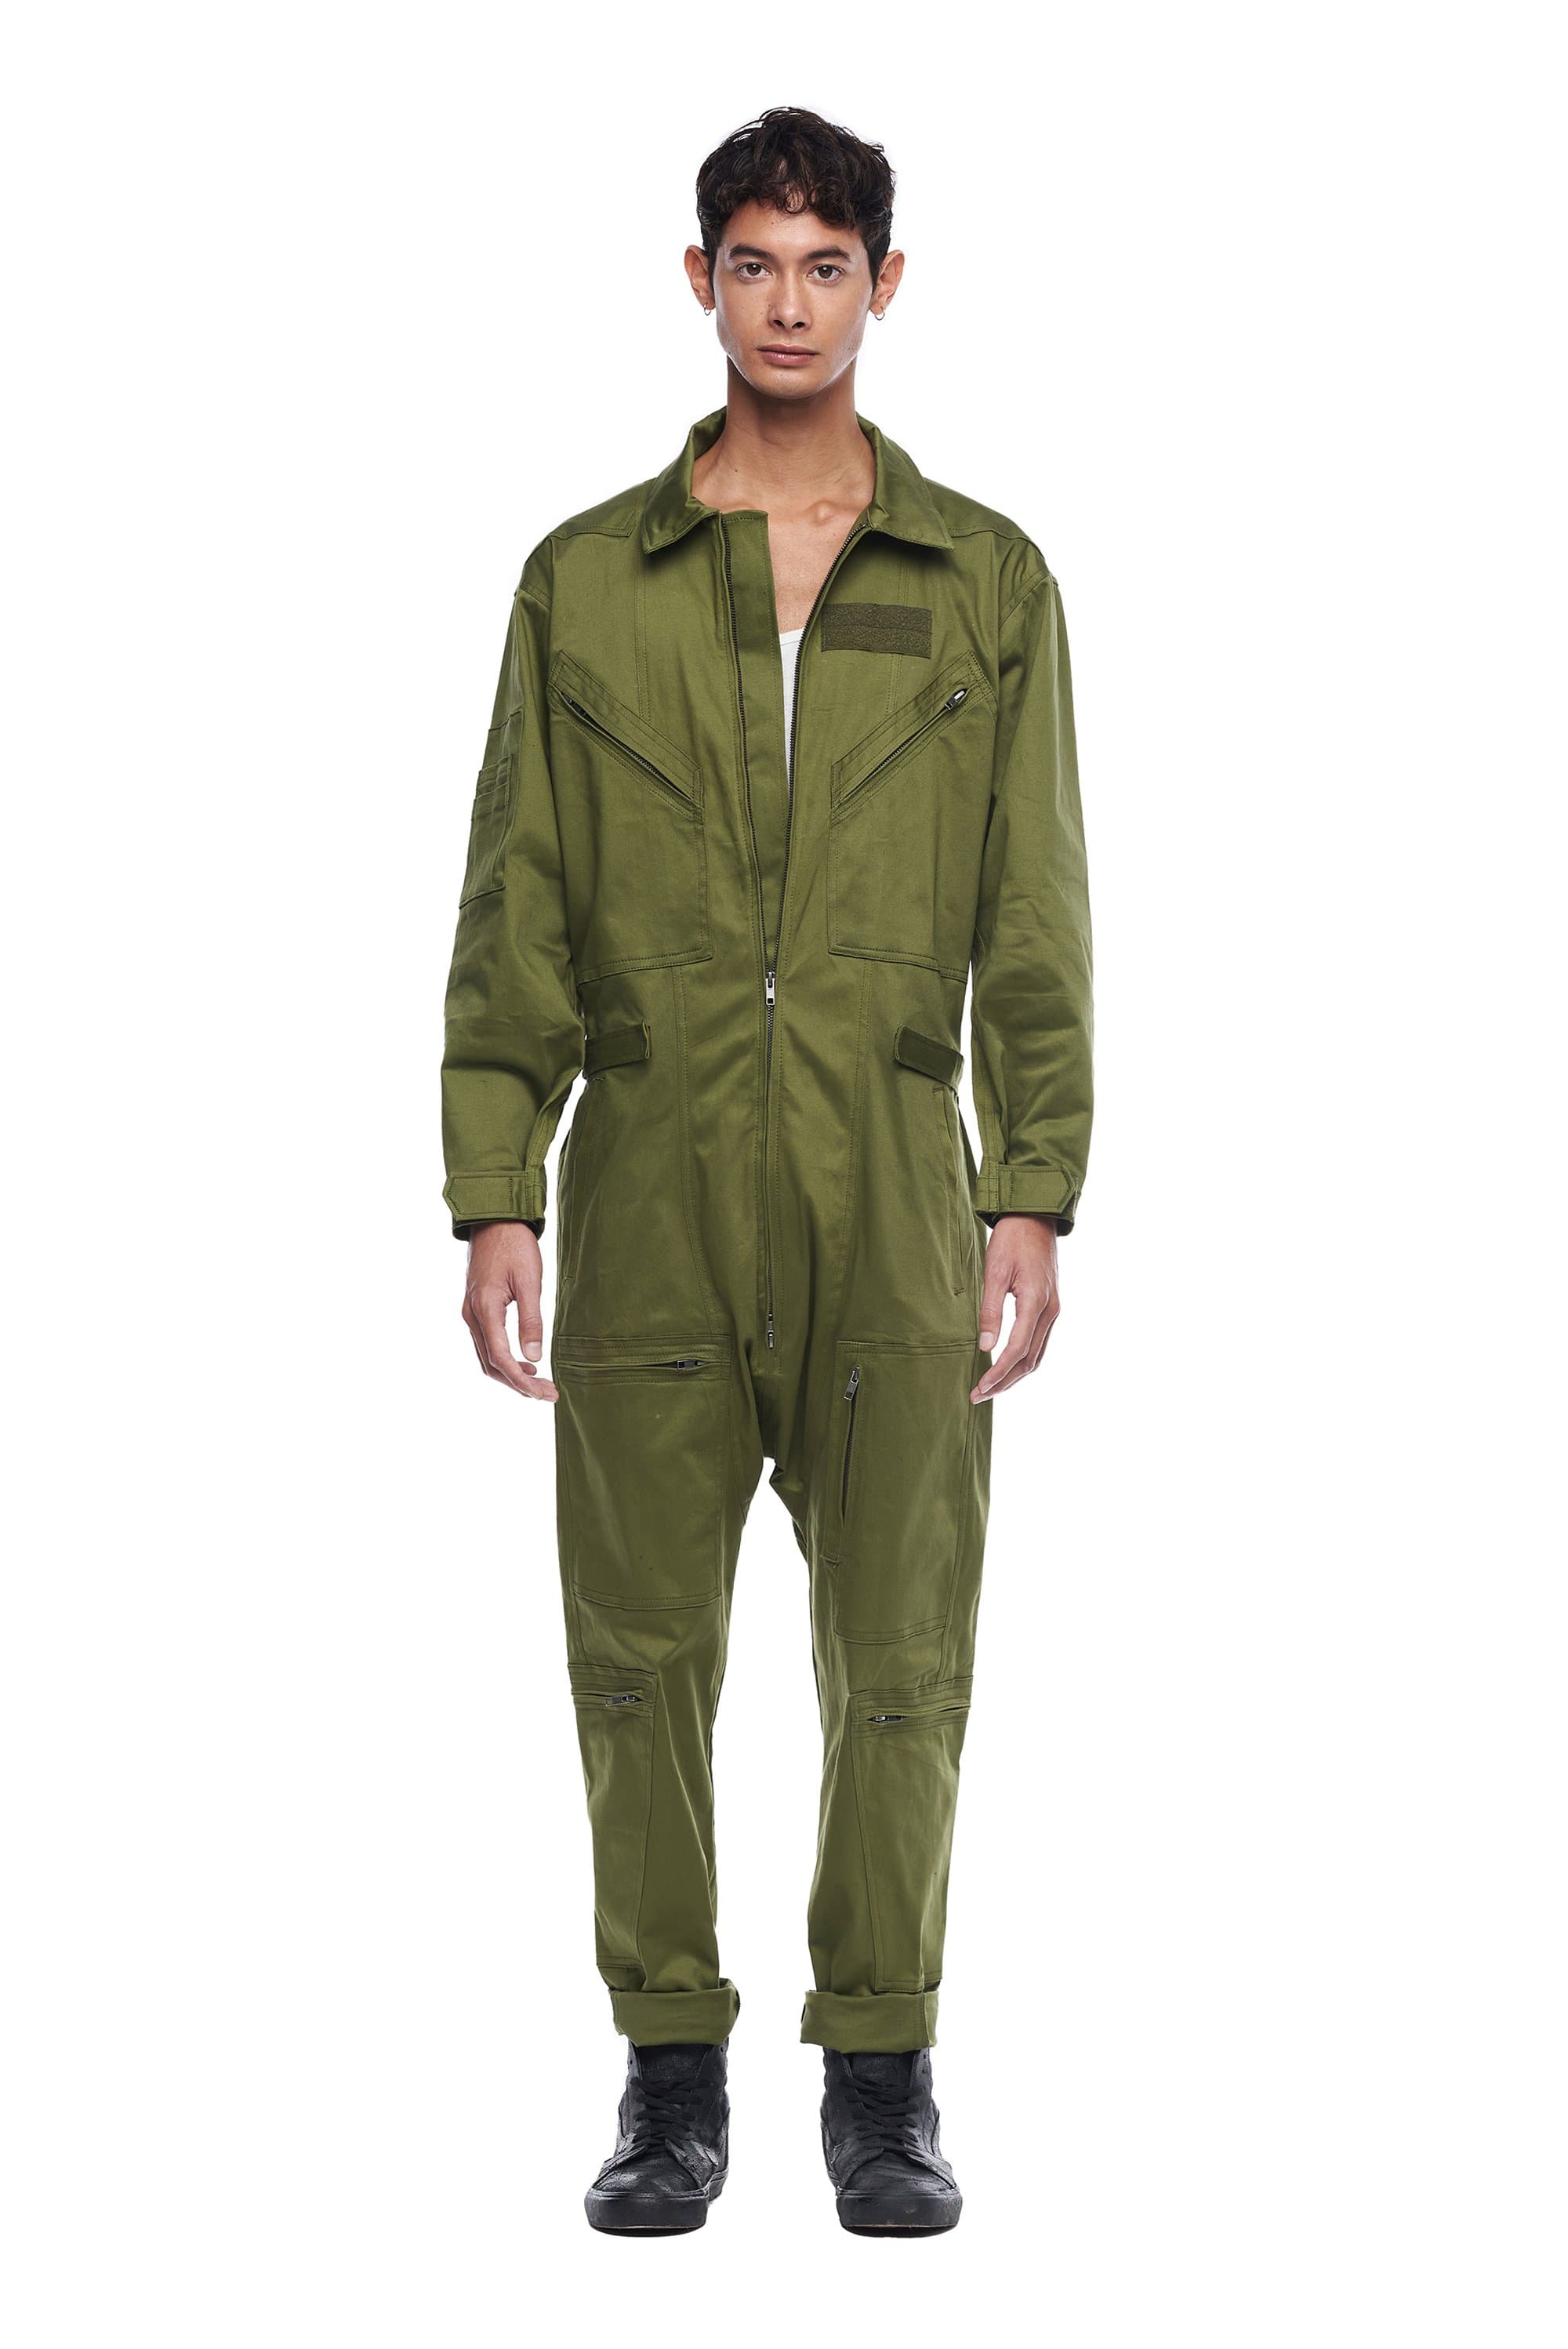 MILITARY JUMPSUIT IN GREEN